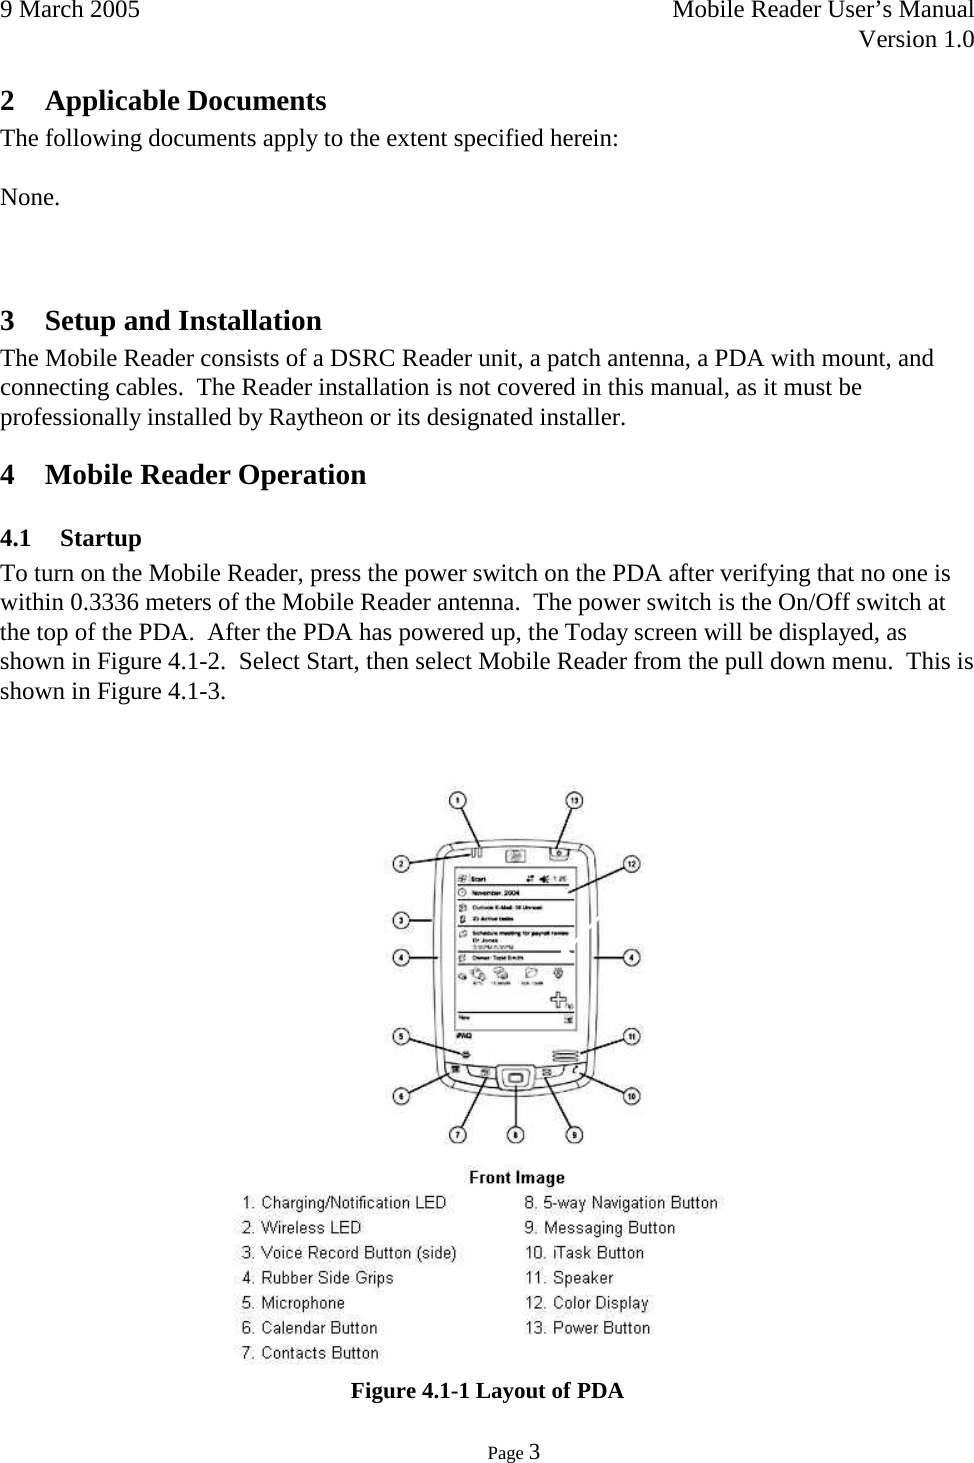 9 March 2005    Mobile Reader User’s Manual   Version 1.0      Page 3  2 Applicable Documents The following documents apply to the extent specified herein:  None.   3 Setup and Installation  The Mobile Reader consists of a DSRC Reader unit, a patch antenna, a PDA with mount, and connecting cables.  The Reader installation is not covered in this manual, as it must be professionally installed by Raytheon or its designated installer. 4 Mobile Reader Operation 4.1 Startup  To turn on the Mobile Reader, press the power switch on the PDA after verifying that no one is within 0.3336 meters of the Mobile Reader antenna.  The power switch is the On/Off switch at the top of the PDA.  After the PDA has powered up, the Today screen will be displayed, as shown in Figure 4.1-2.  Select Start, then select Mobile Reader from the pull down menu.  This is shown in Figure 4.1-3.      Figure 4.1-1 Layout of PDA 